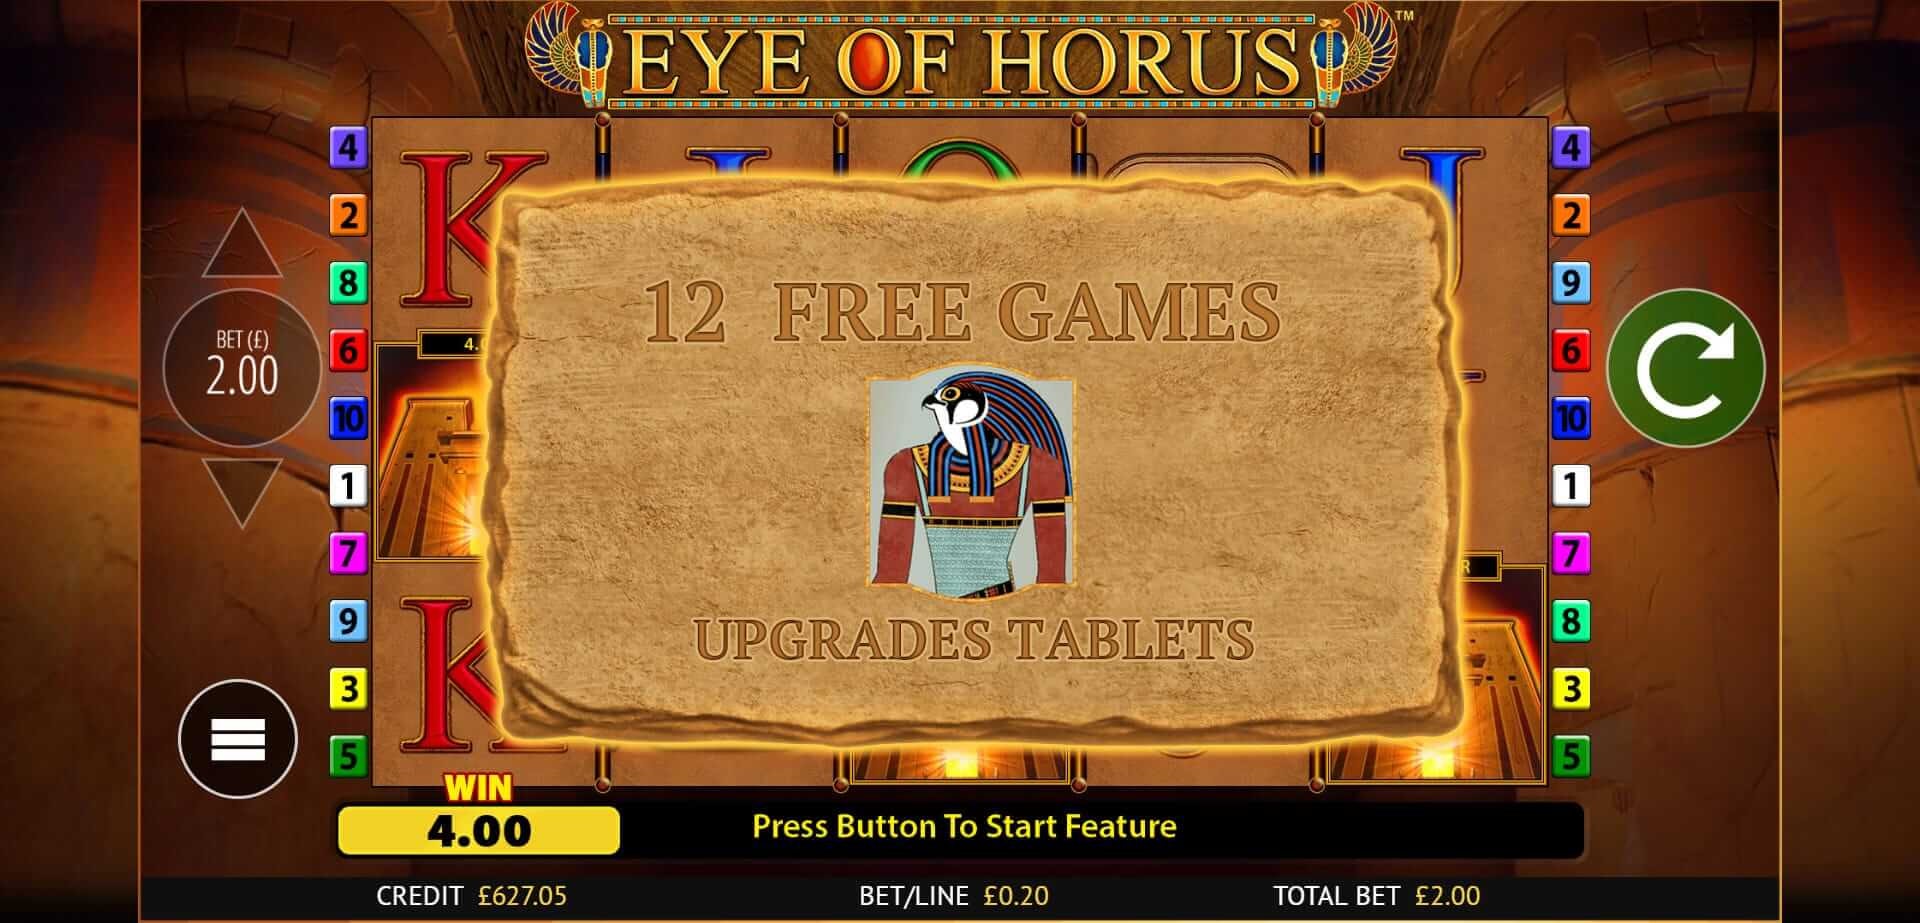 How Slots Is actually Set 10 free spins on sign up ? And how Can you Winnings?